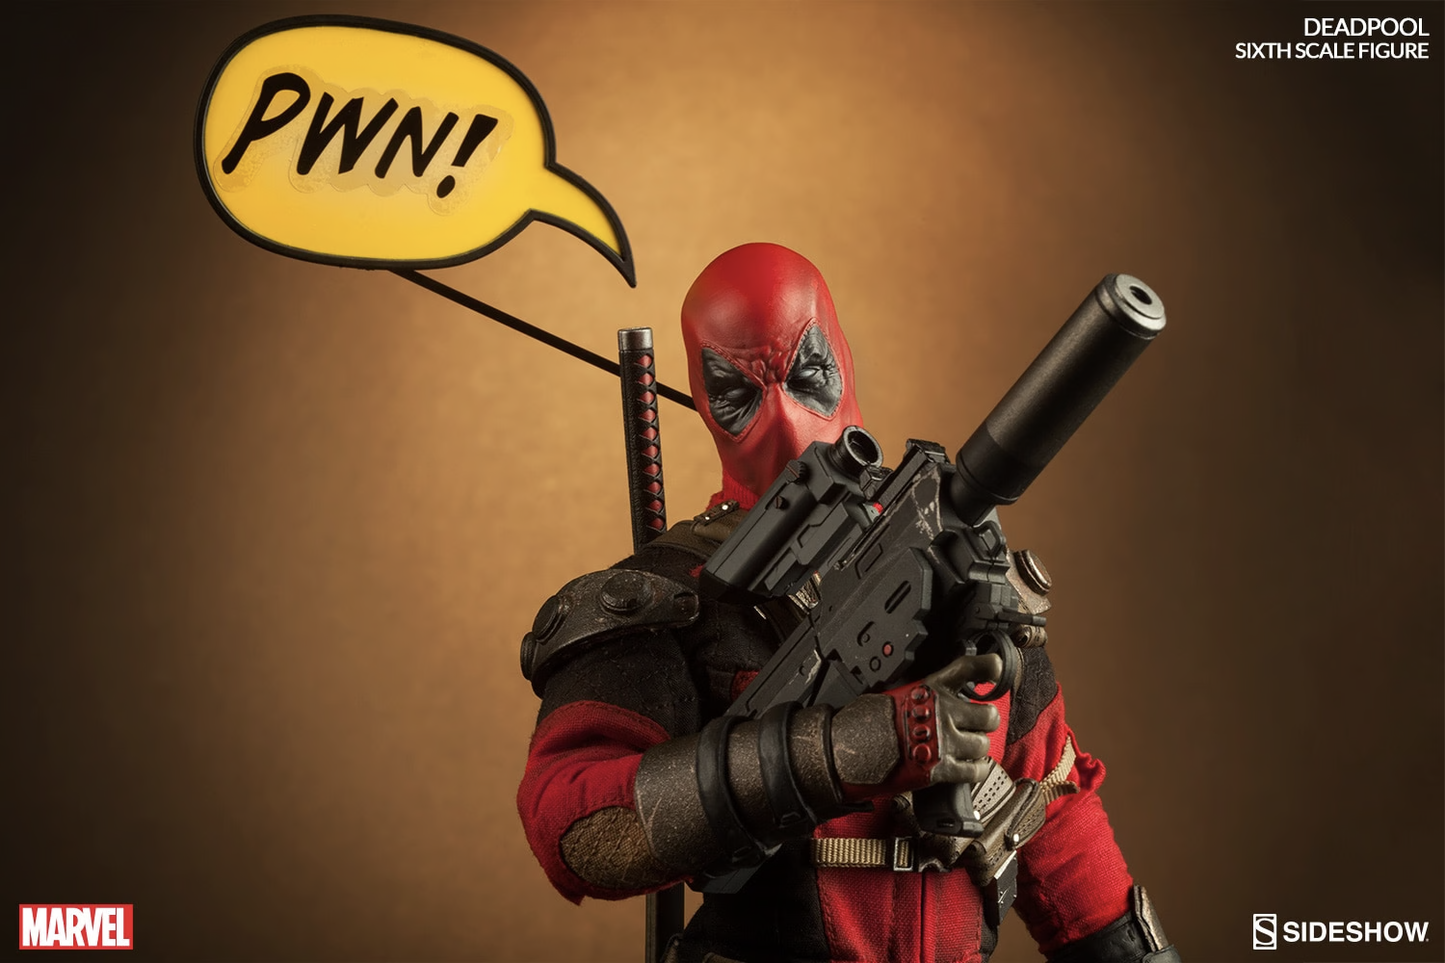 SideShow Collectibles  - DeadPool sixthscale figure